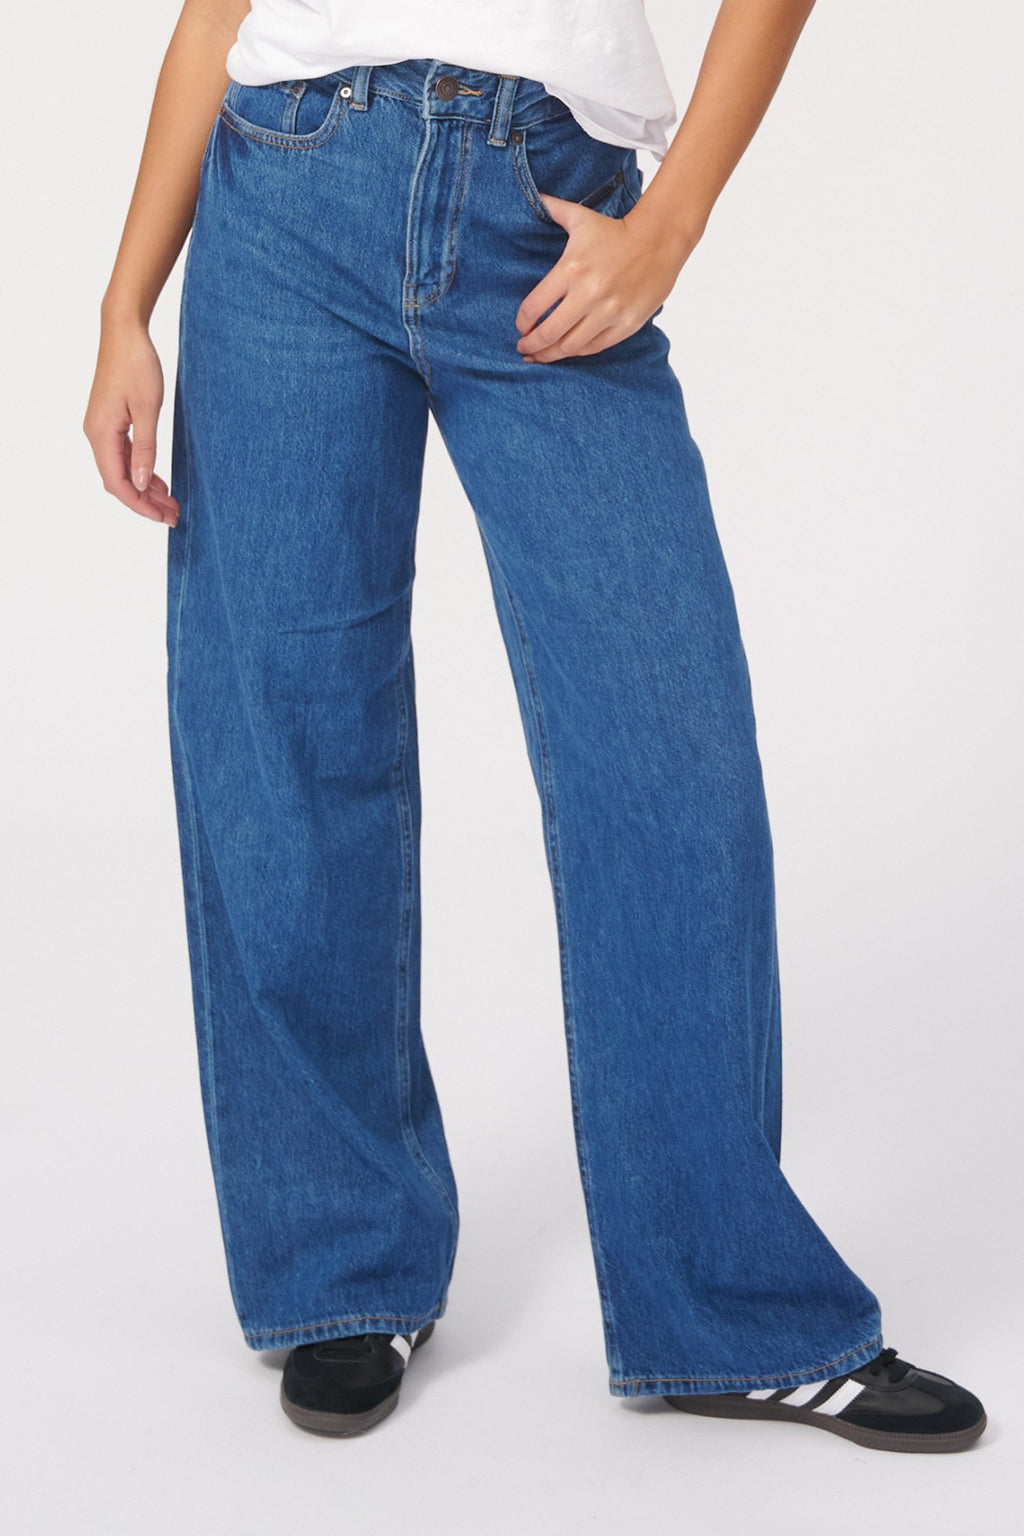 The Original Performance Wide Jeans - Package Deal (3 τεμ.)